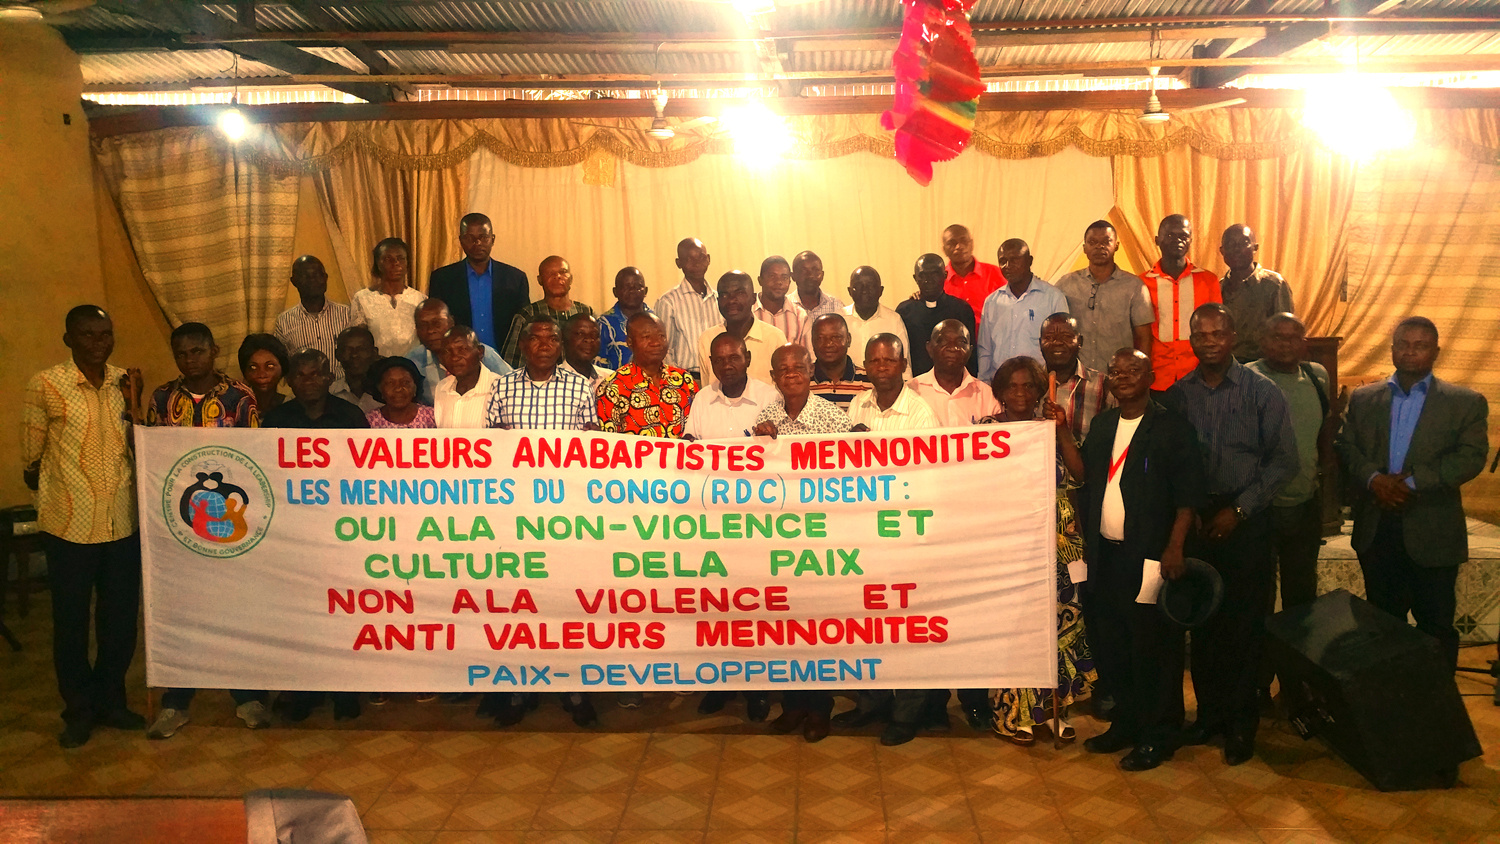 Participants discuss ideas and experiences during a workshop on Mennonite values and nonviolence in DR Congo.